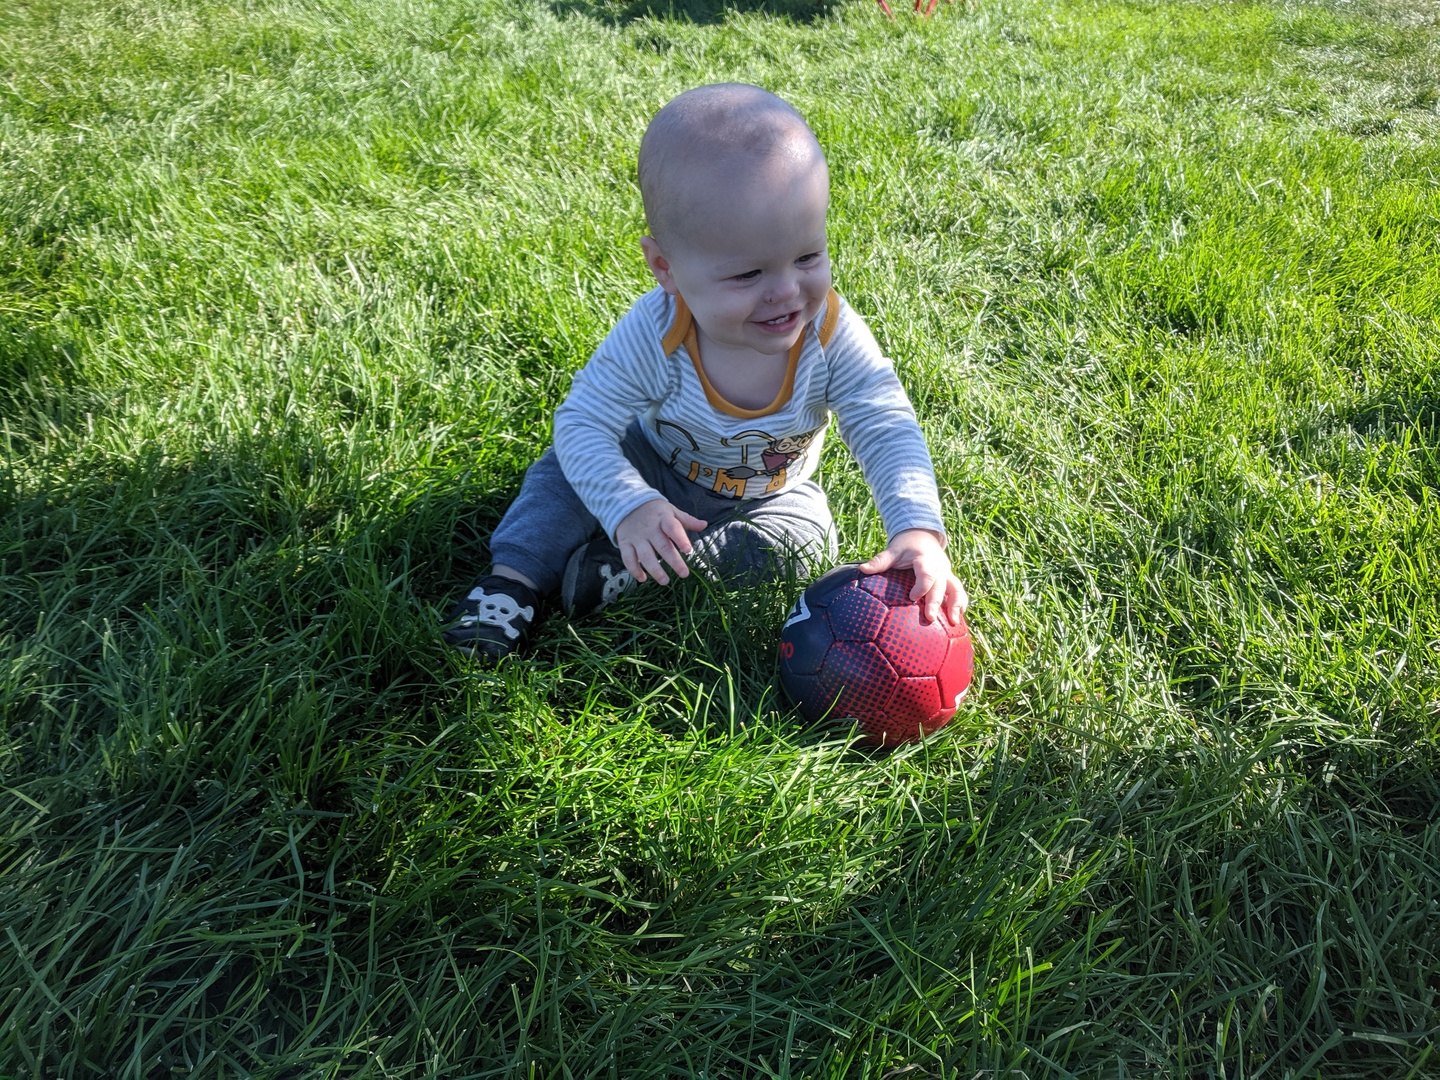 Baby playing with ball